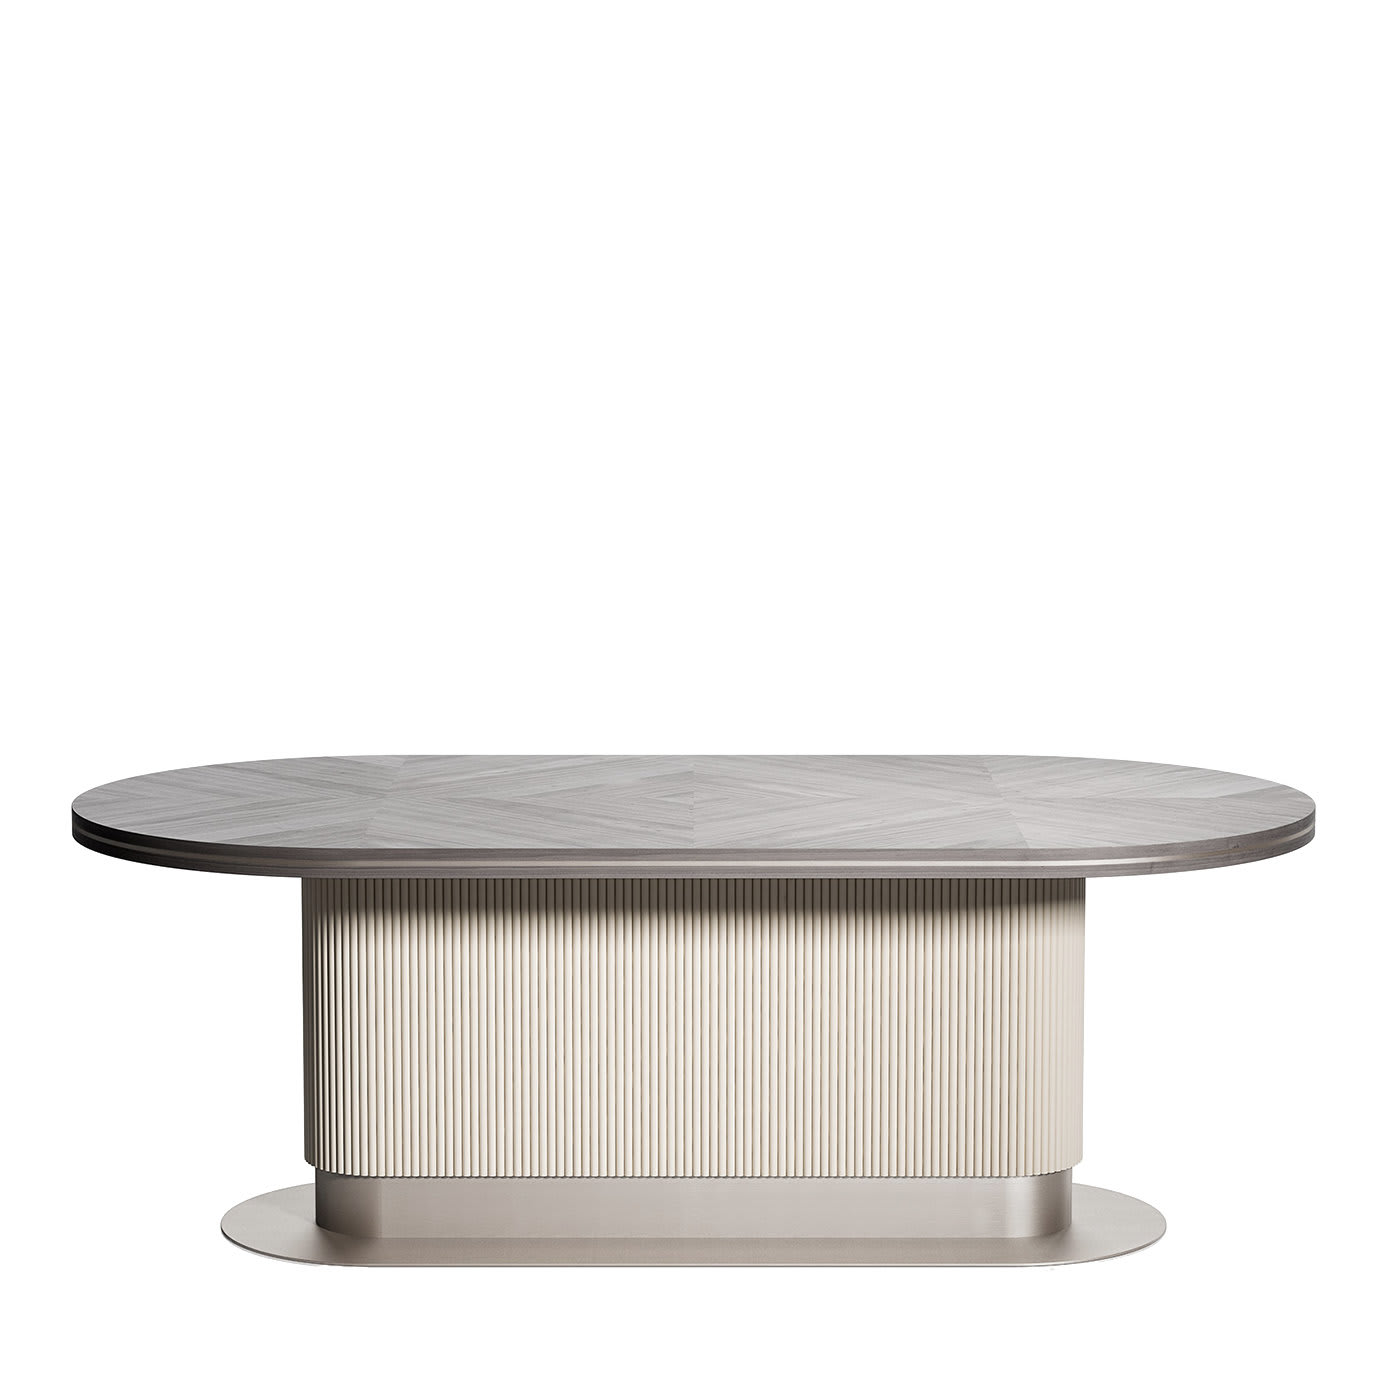 Cocoon Oval Dining Table - CPRN Homood